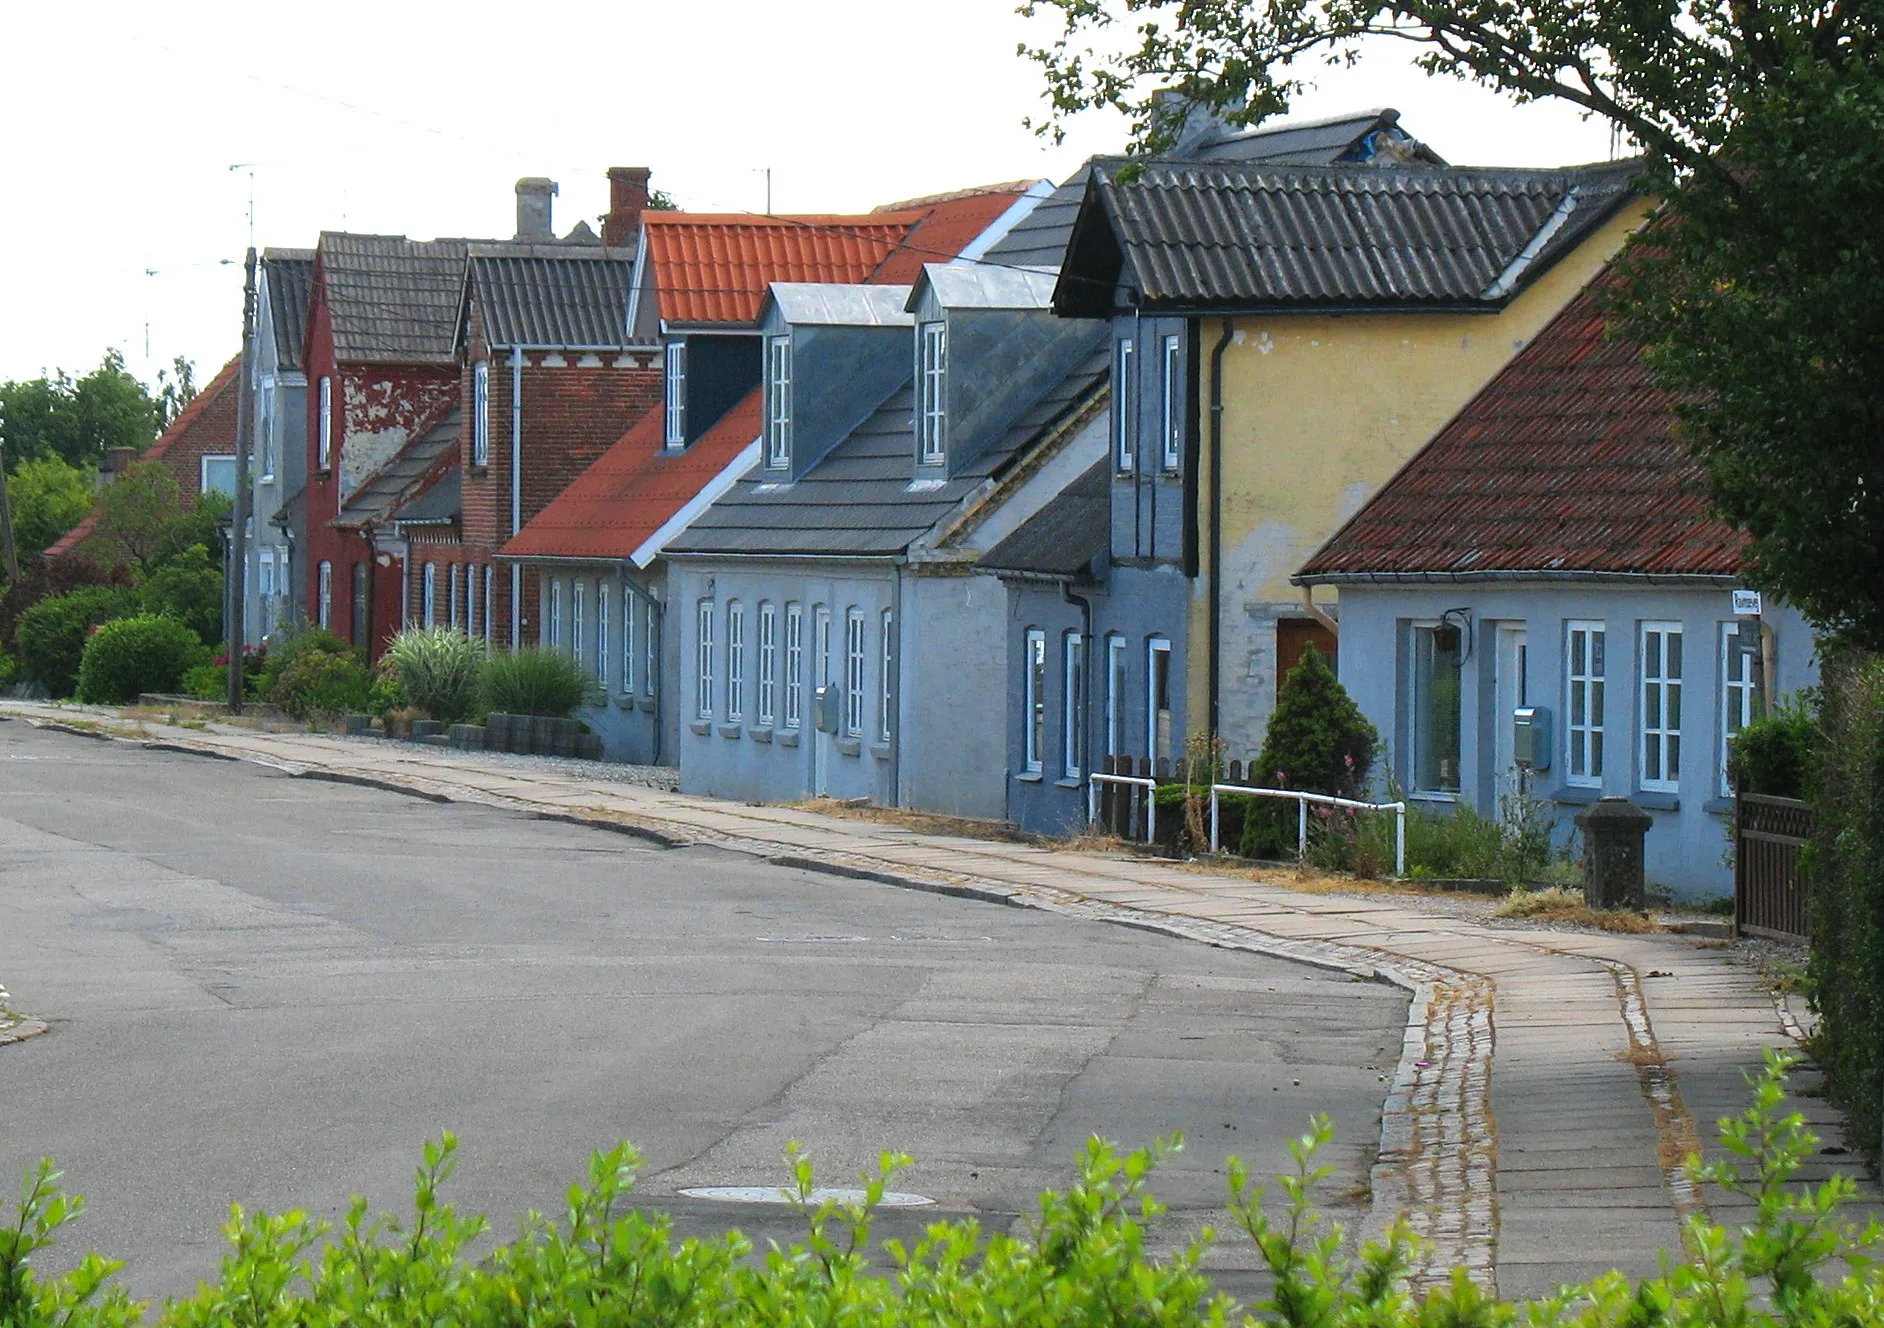 Photo showing: Houses from the small town "Nørre Alslev" located on the island Falster in east Denmark.